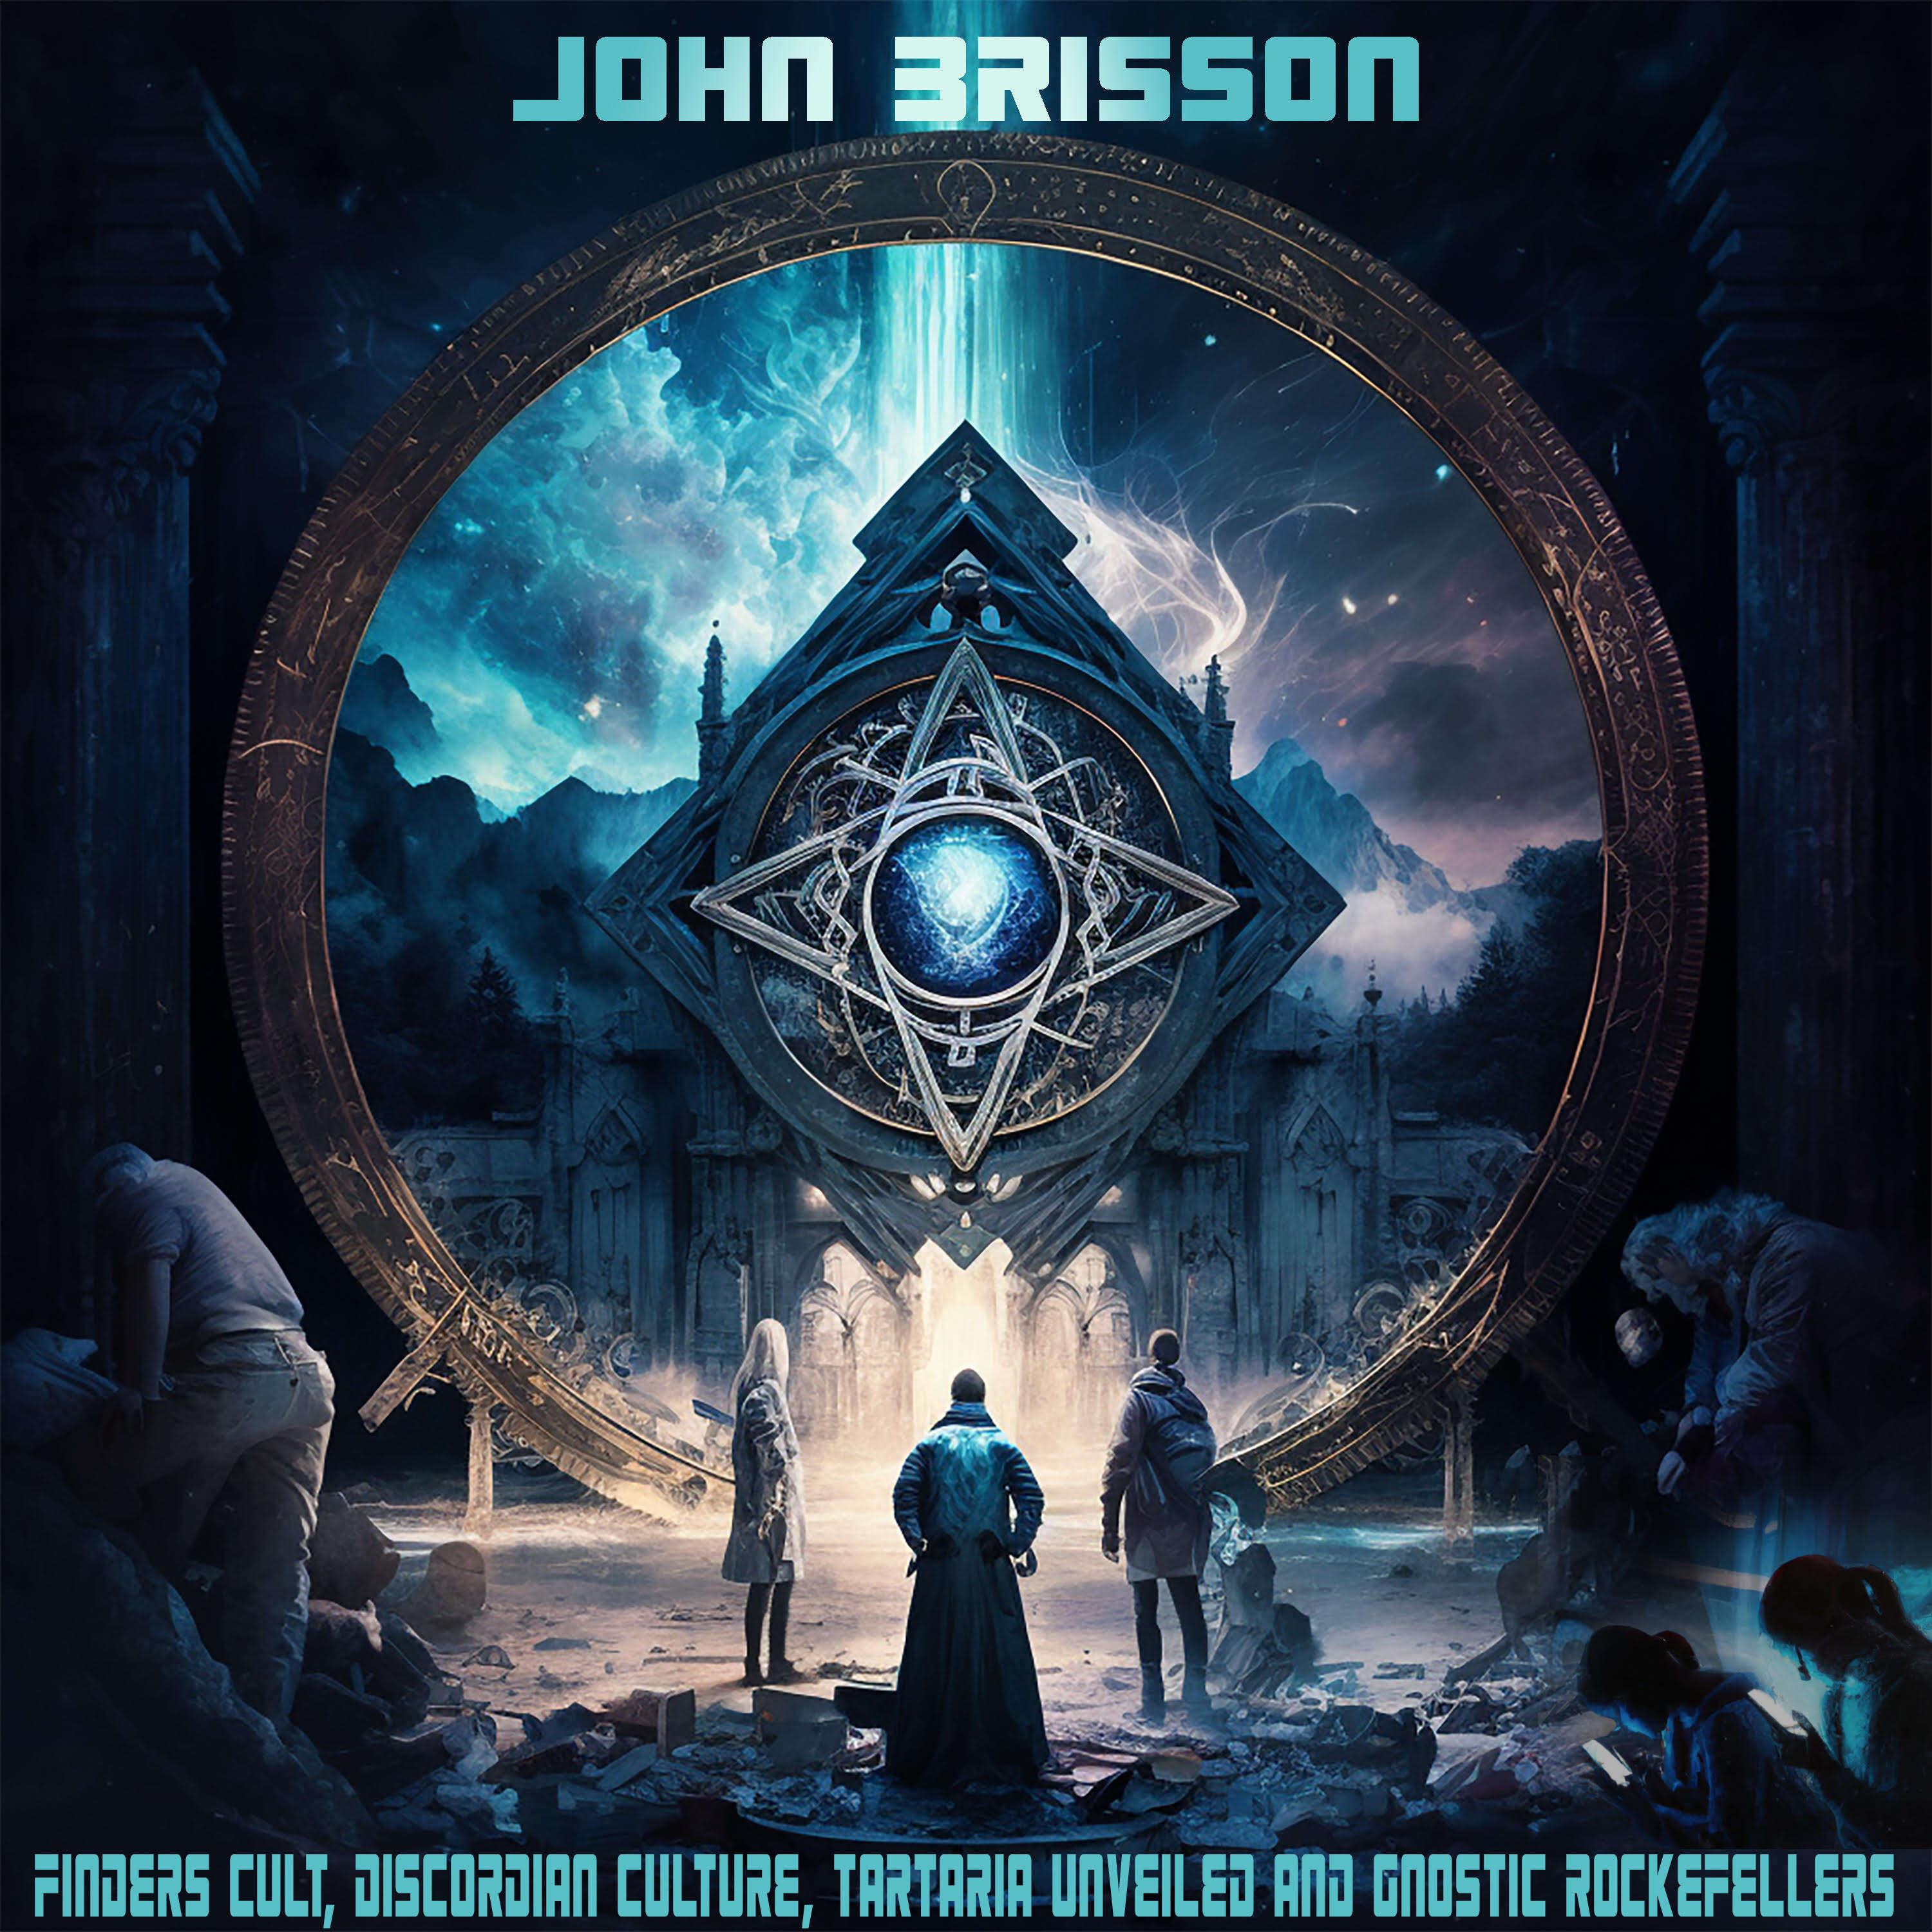 John Brisson | The Finders, Discordian Culture, Tartaria Unveiled, and Gnostic Rockefellers